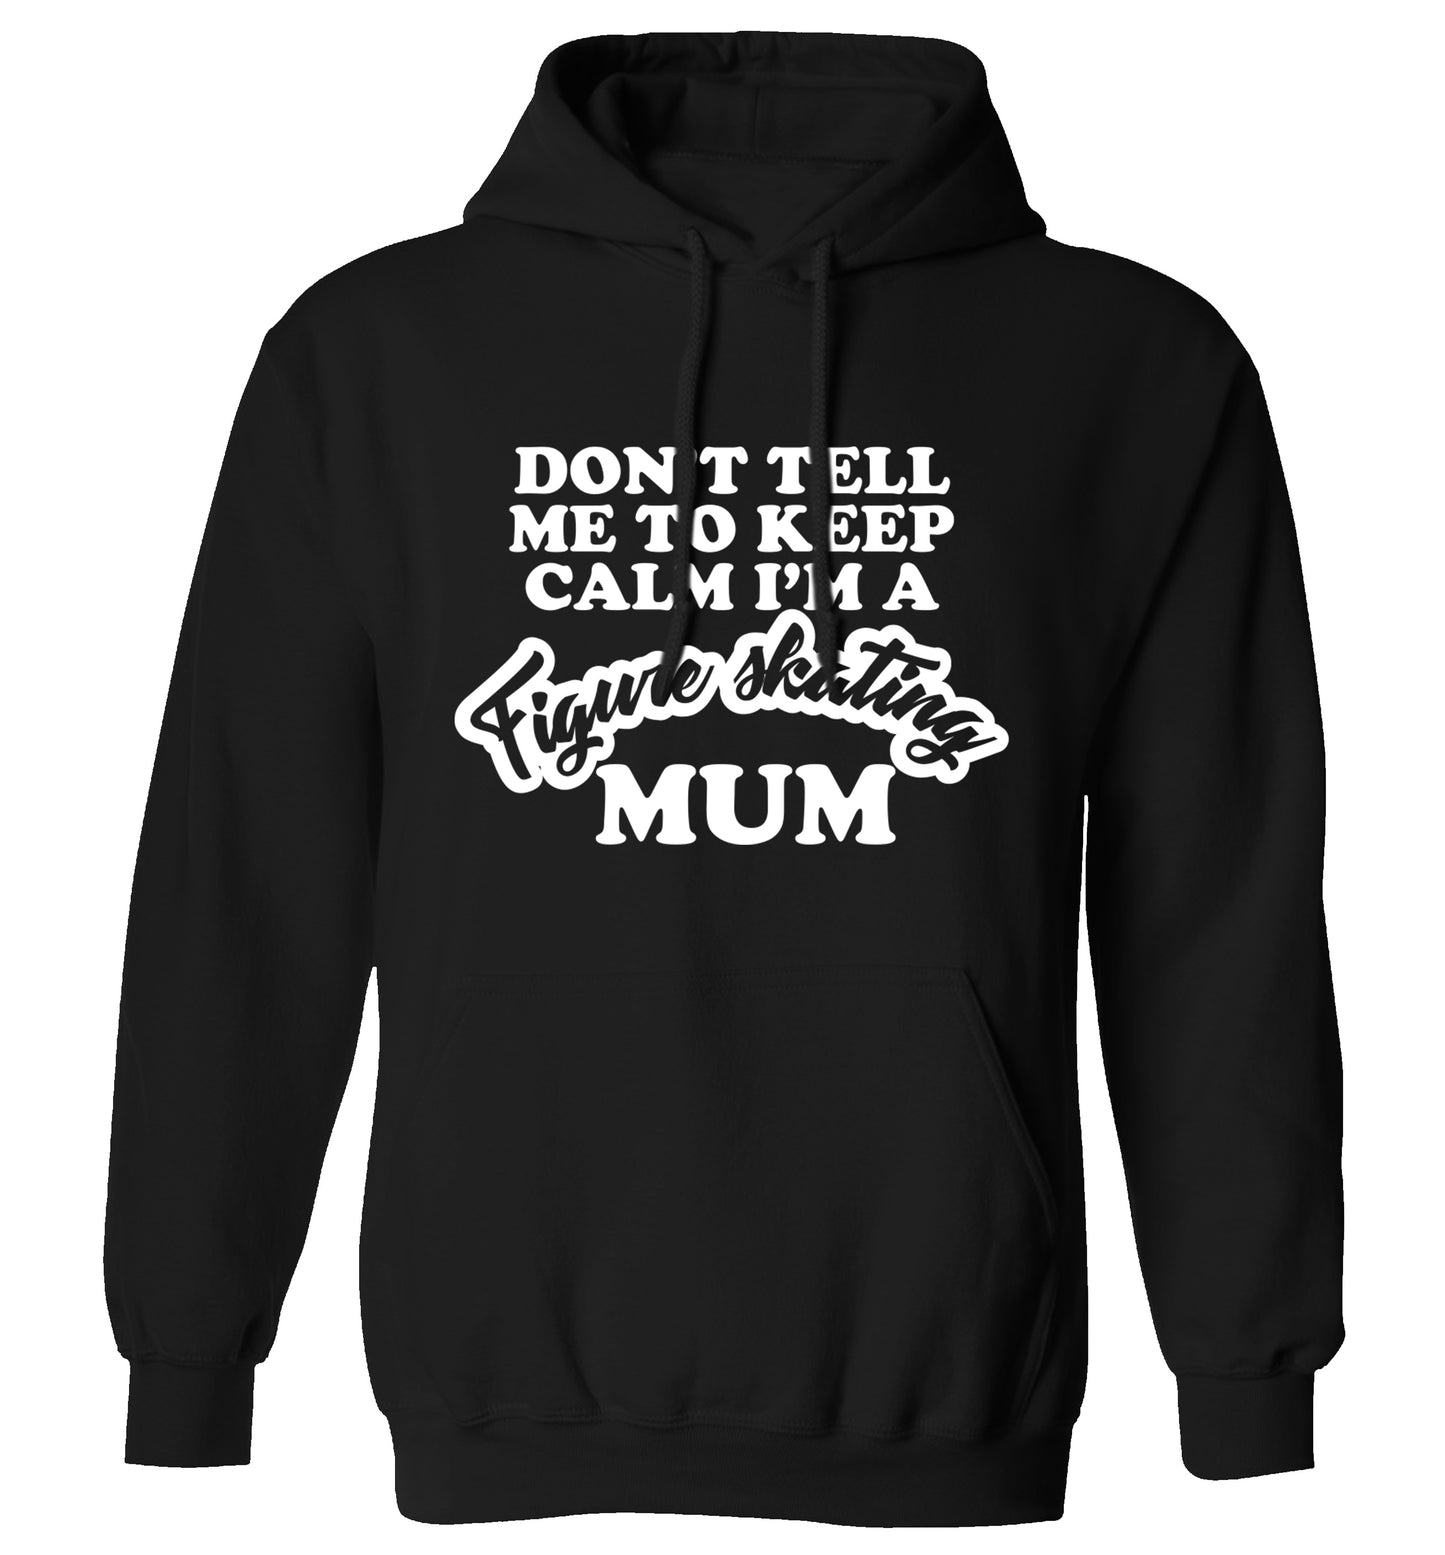 Don't tell me to keep calm I'm a figure skating mum adults unisexblack hoodie 2XL